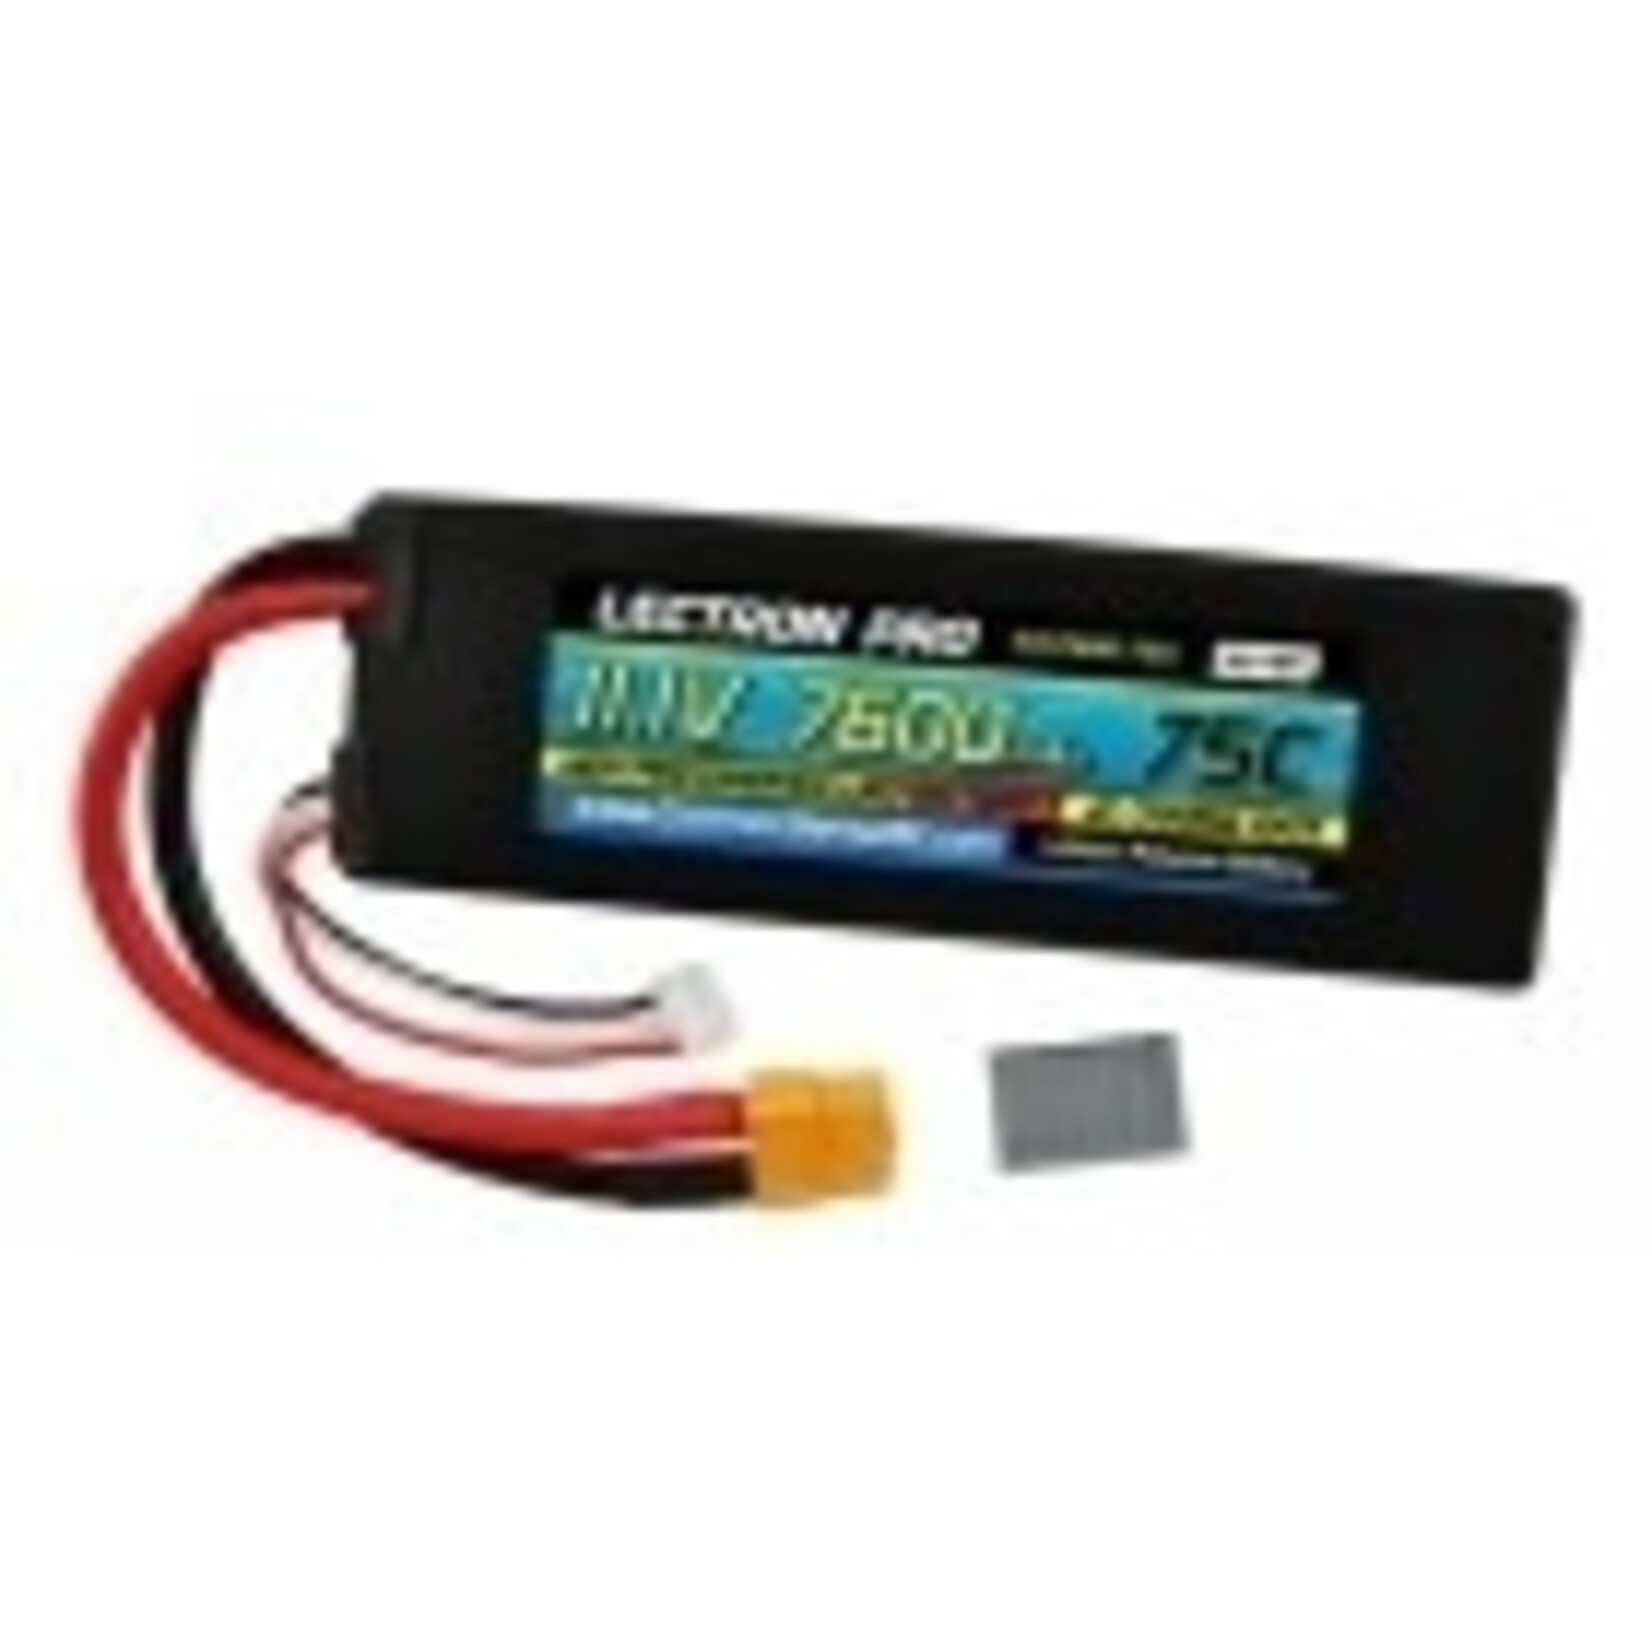 COMMON SENSE RC Lectron Pro 11.1V 7600mAh 75C Lipo Battery with XT60 Connector + CSRC adapter for XT60 batteries to popular RC vehicles